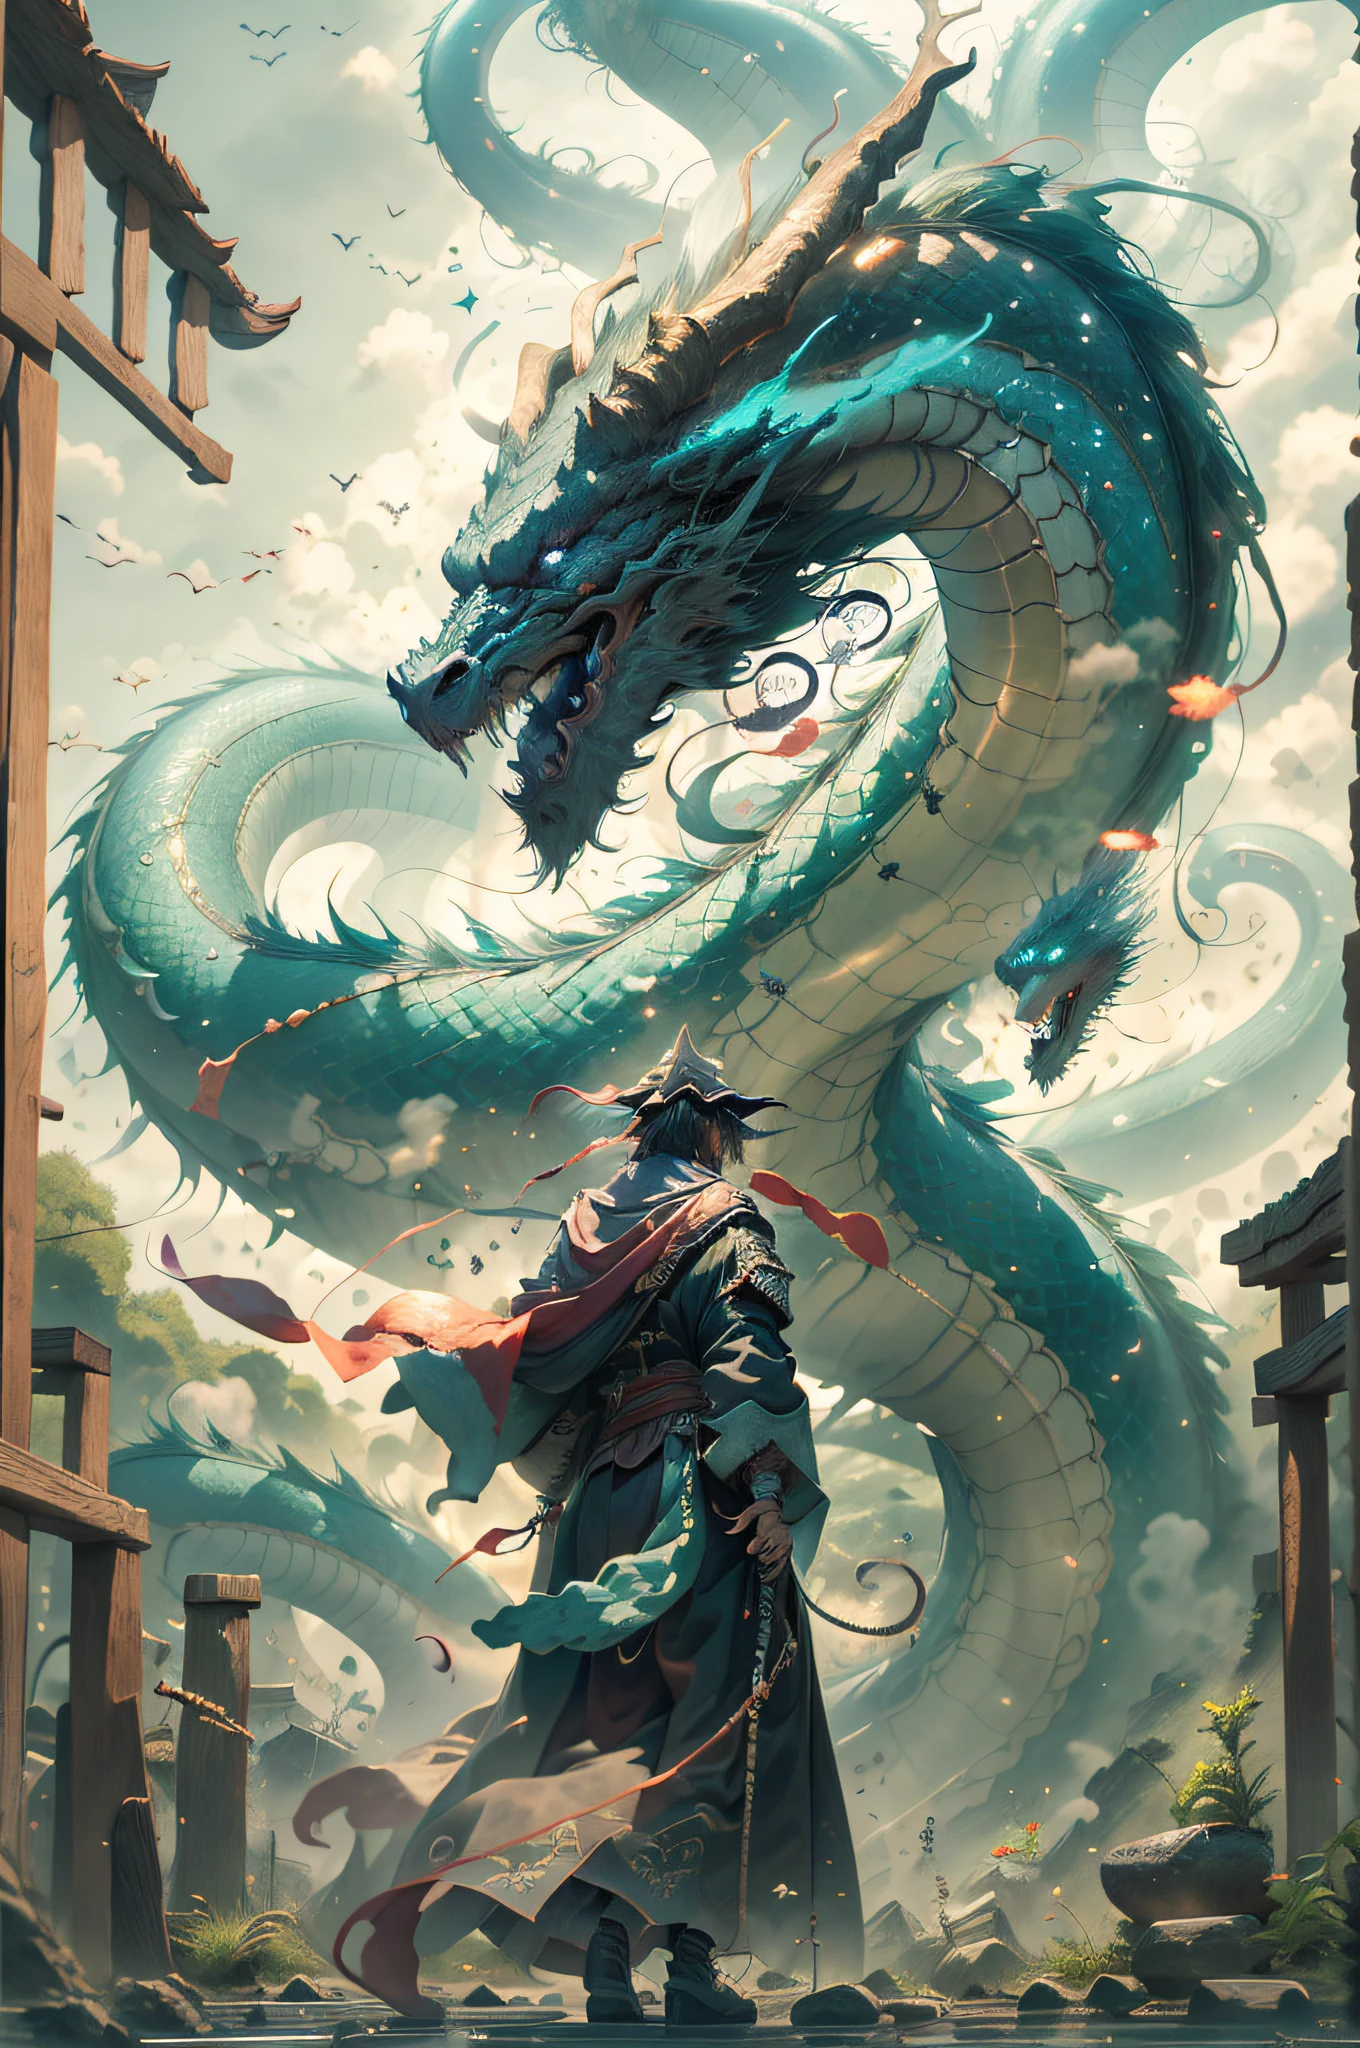 V0id3nergy，Cyan chinesedragon，Masterpiece，Best quality，High detail，Epic detail，hyper qualit，8K，unreal-engine，ultra - detailed，hight contrast，Hyper-detailing，best qualtiy，Ultra-high resolution，mostly cloudy sky，A man facing the green dragon，clad in robes，cabelos preto e longos，Chinese-style clothing，facing away viewer